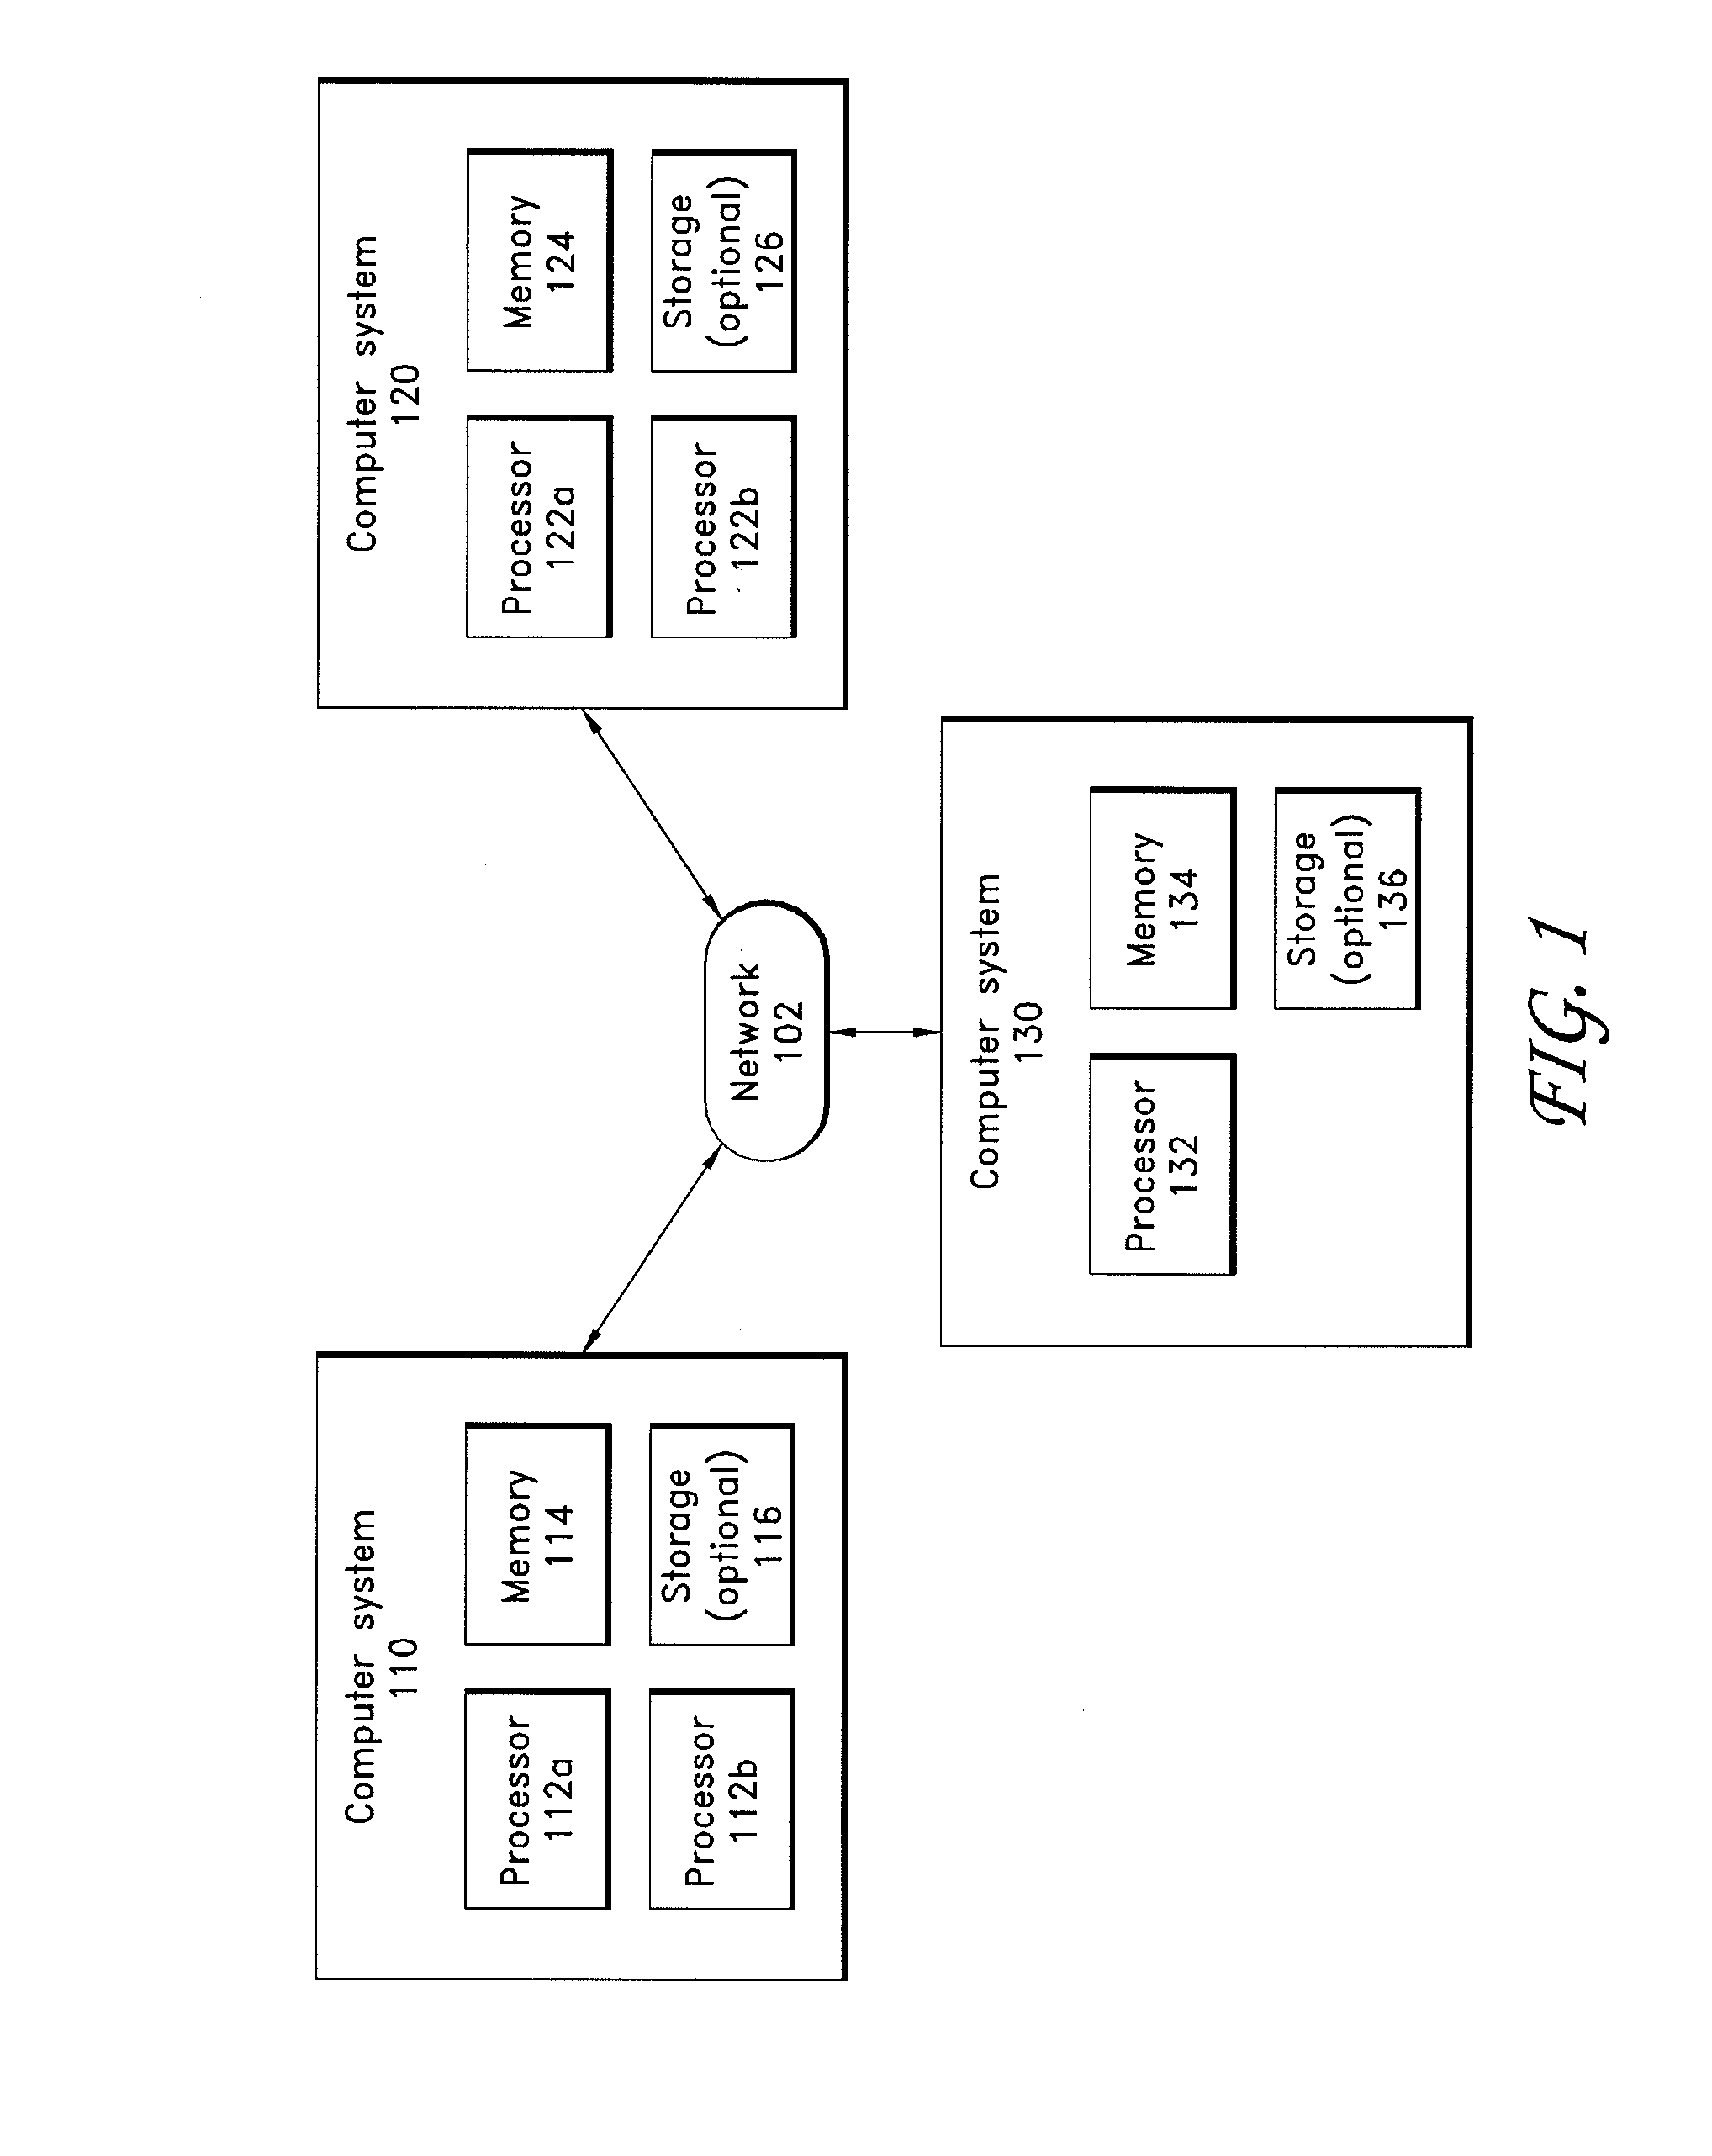 Cluster computing support for application programs